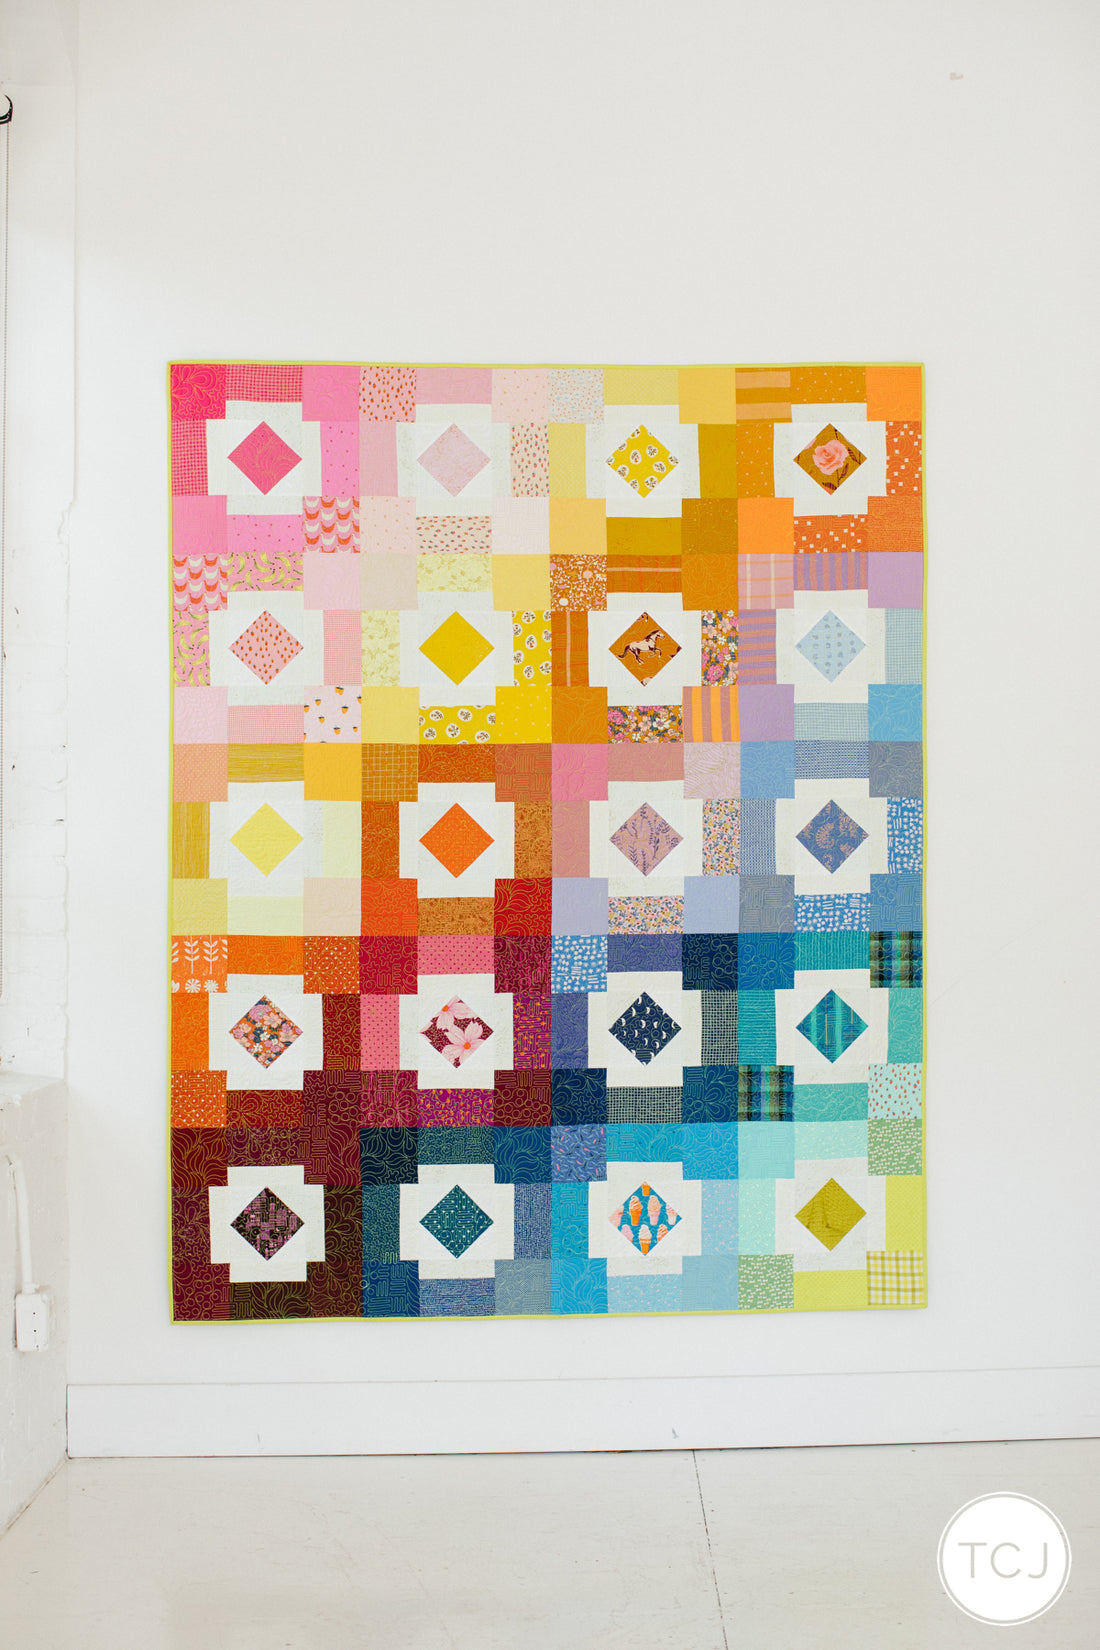 Backyard Party Quilt - The Rainbow One